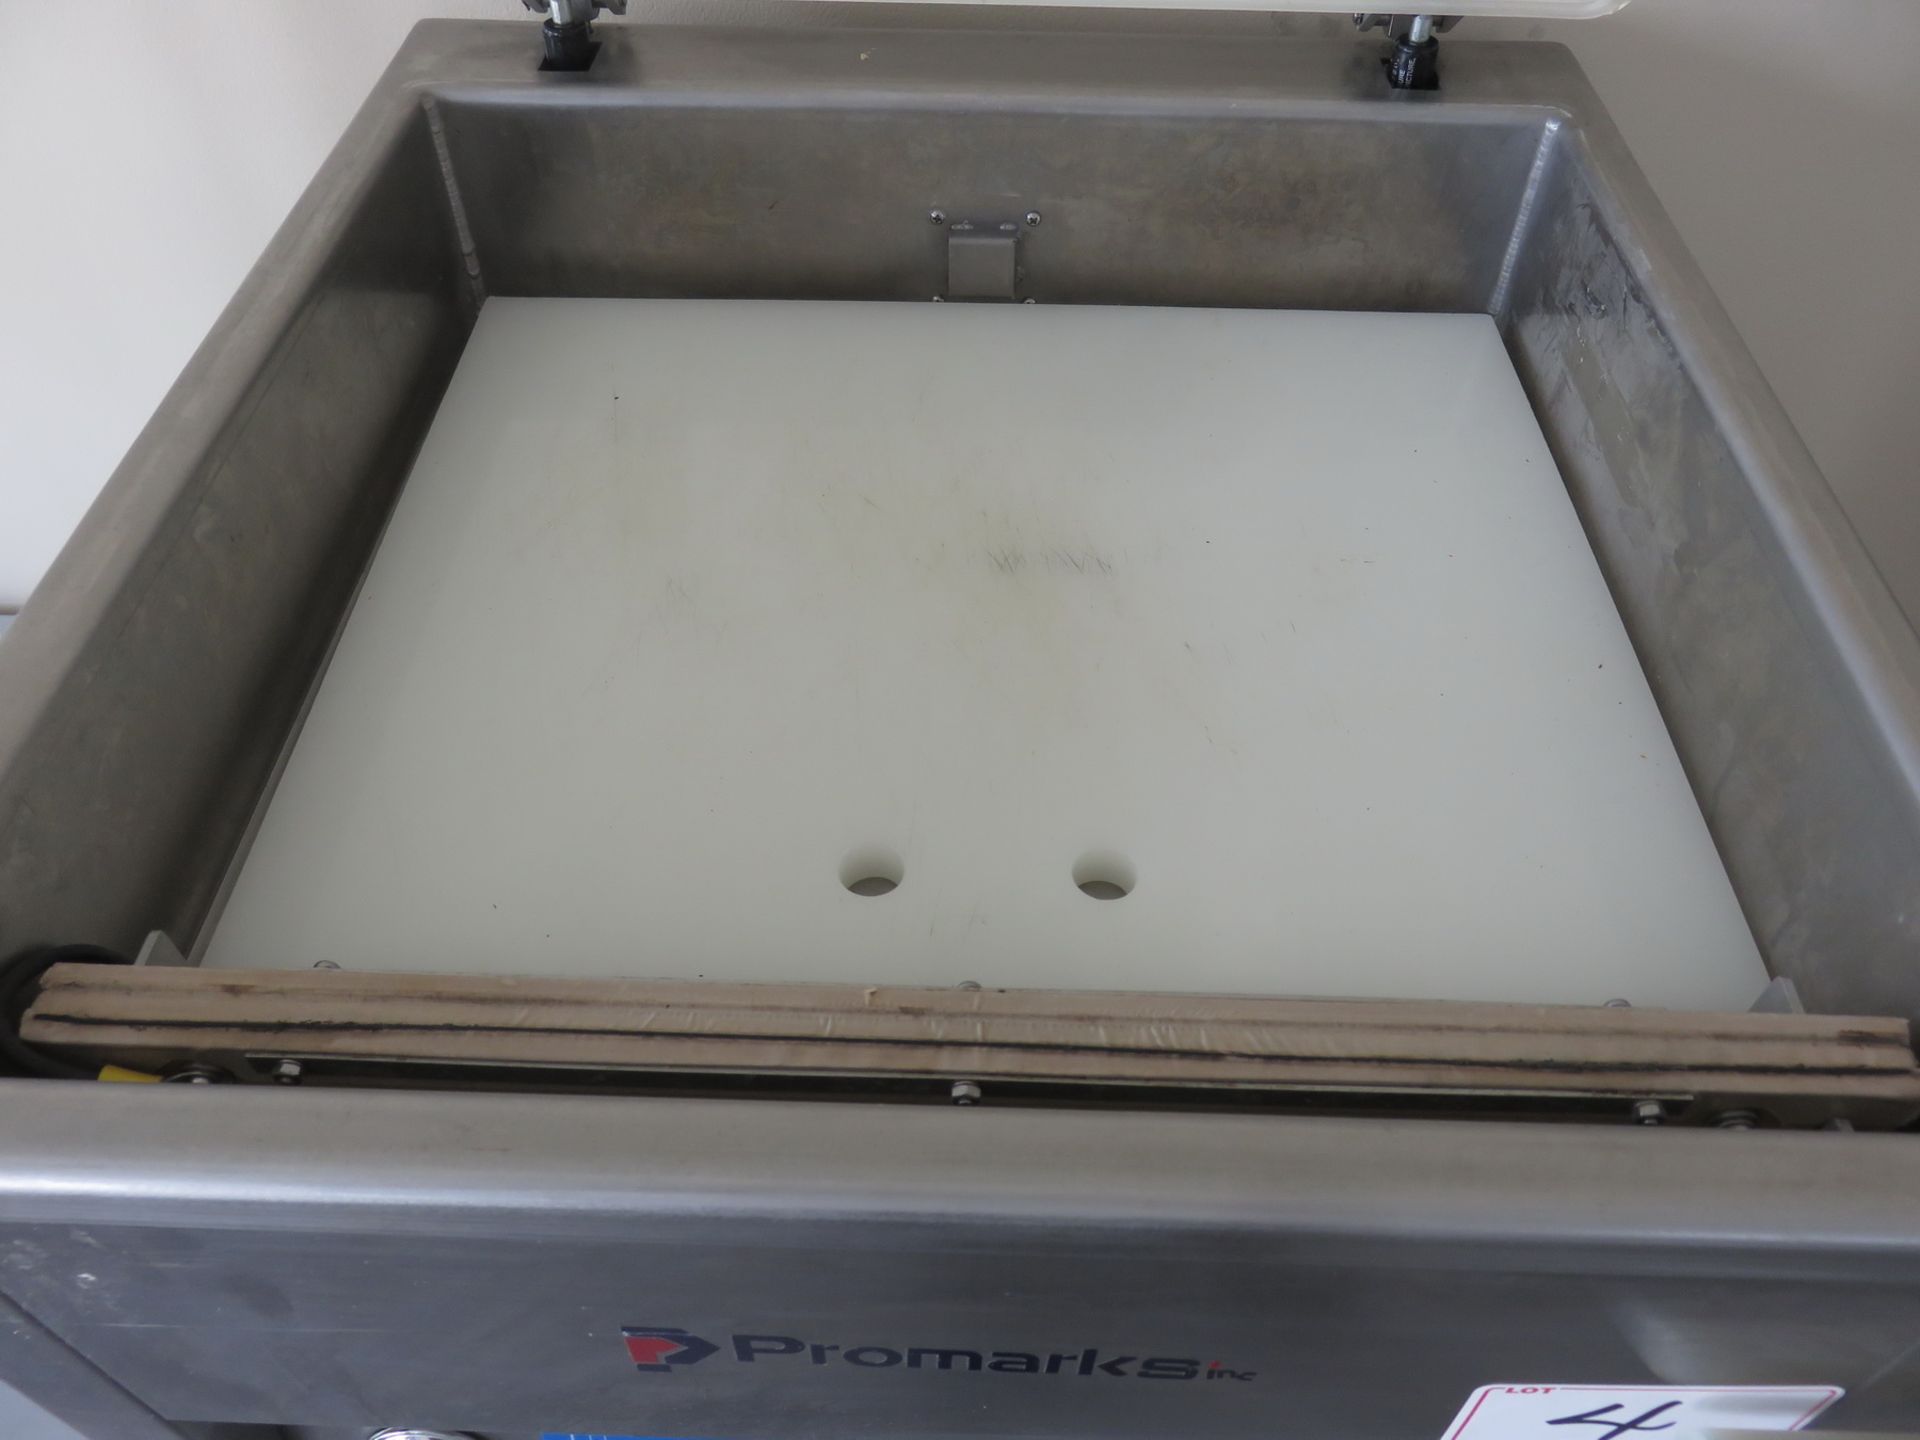 PROMARKS MODEL TC-280F 18" X 14" SINGLE CHAMBER TABLE TOP VACUUM PACKAGING MACHINE - Image 2 of 2